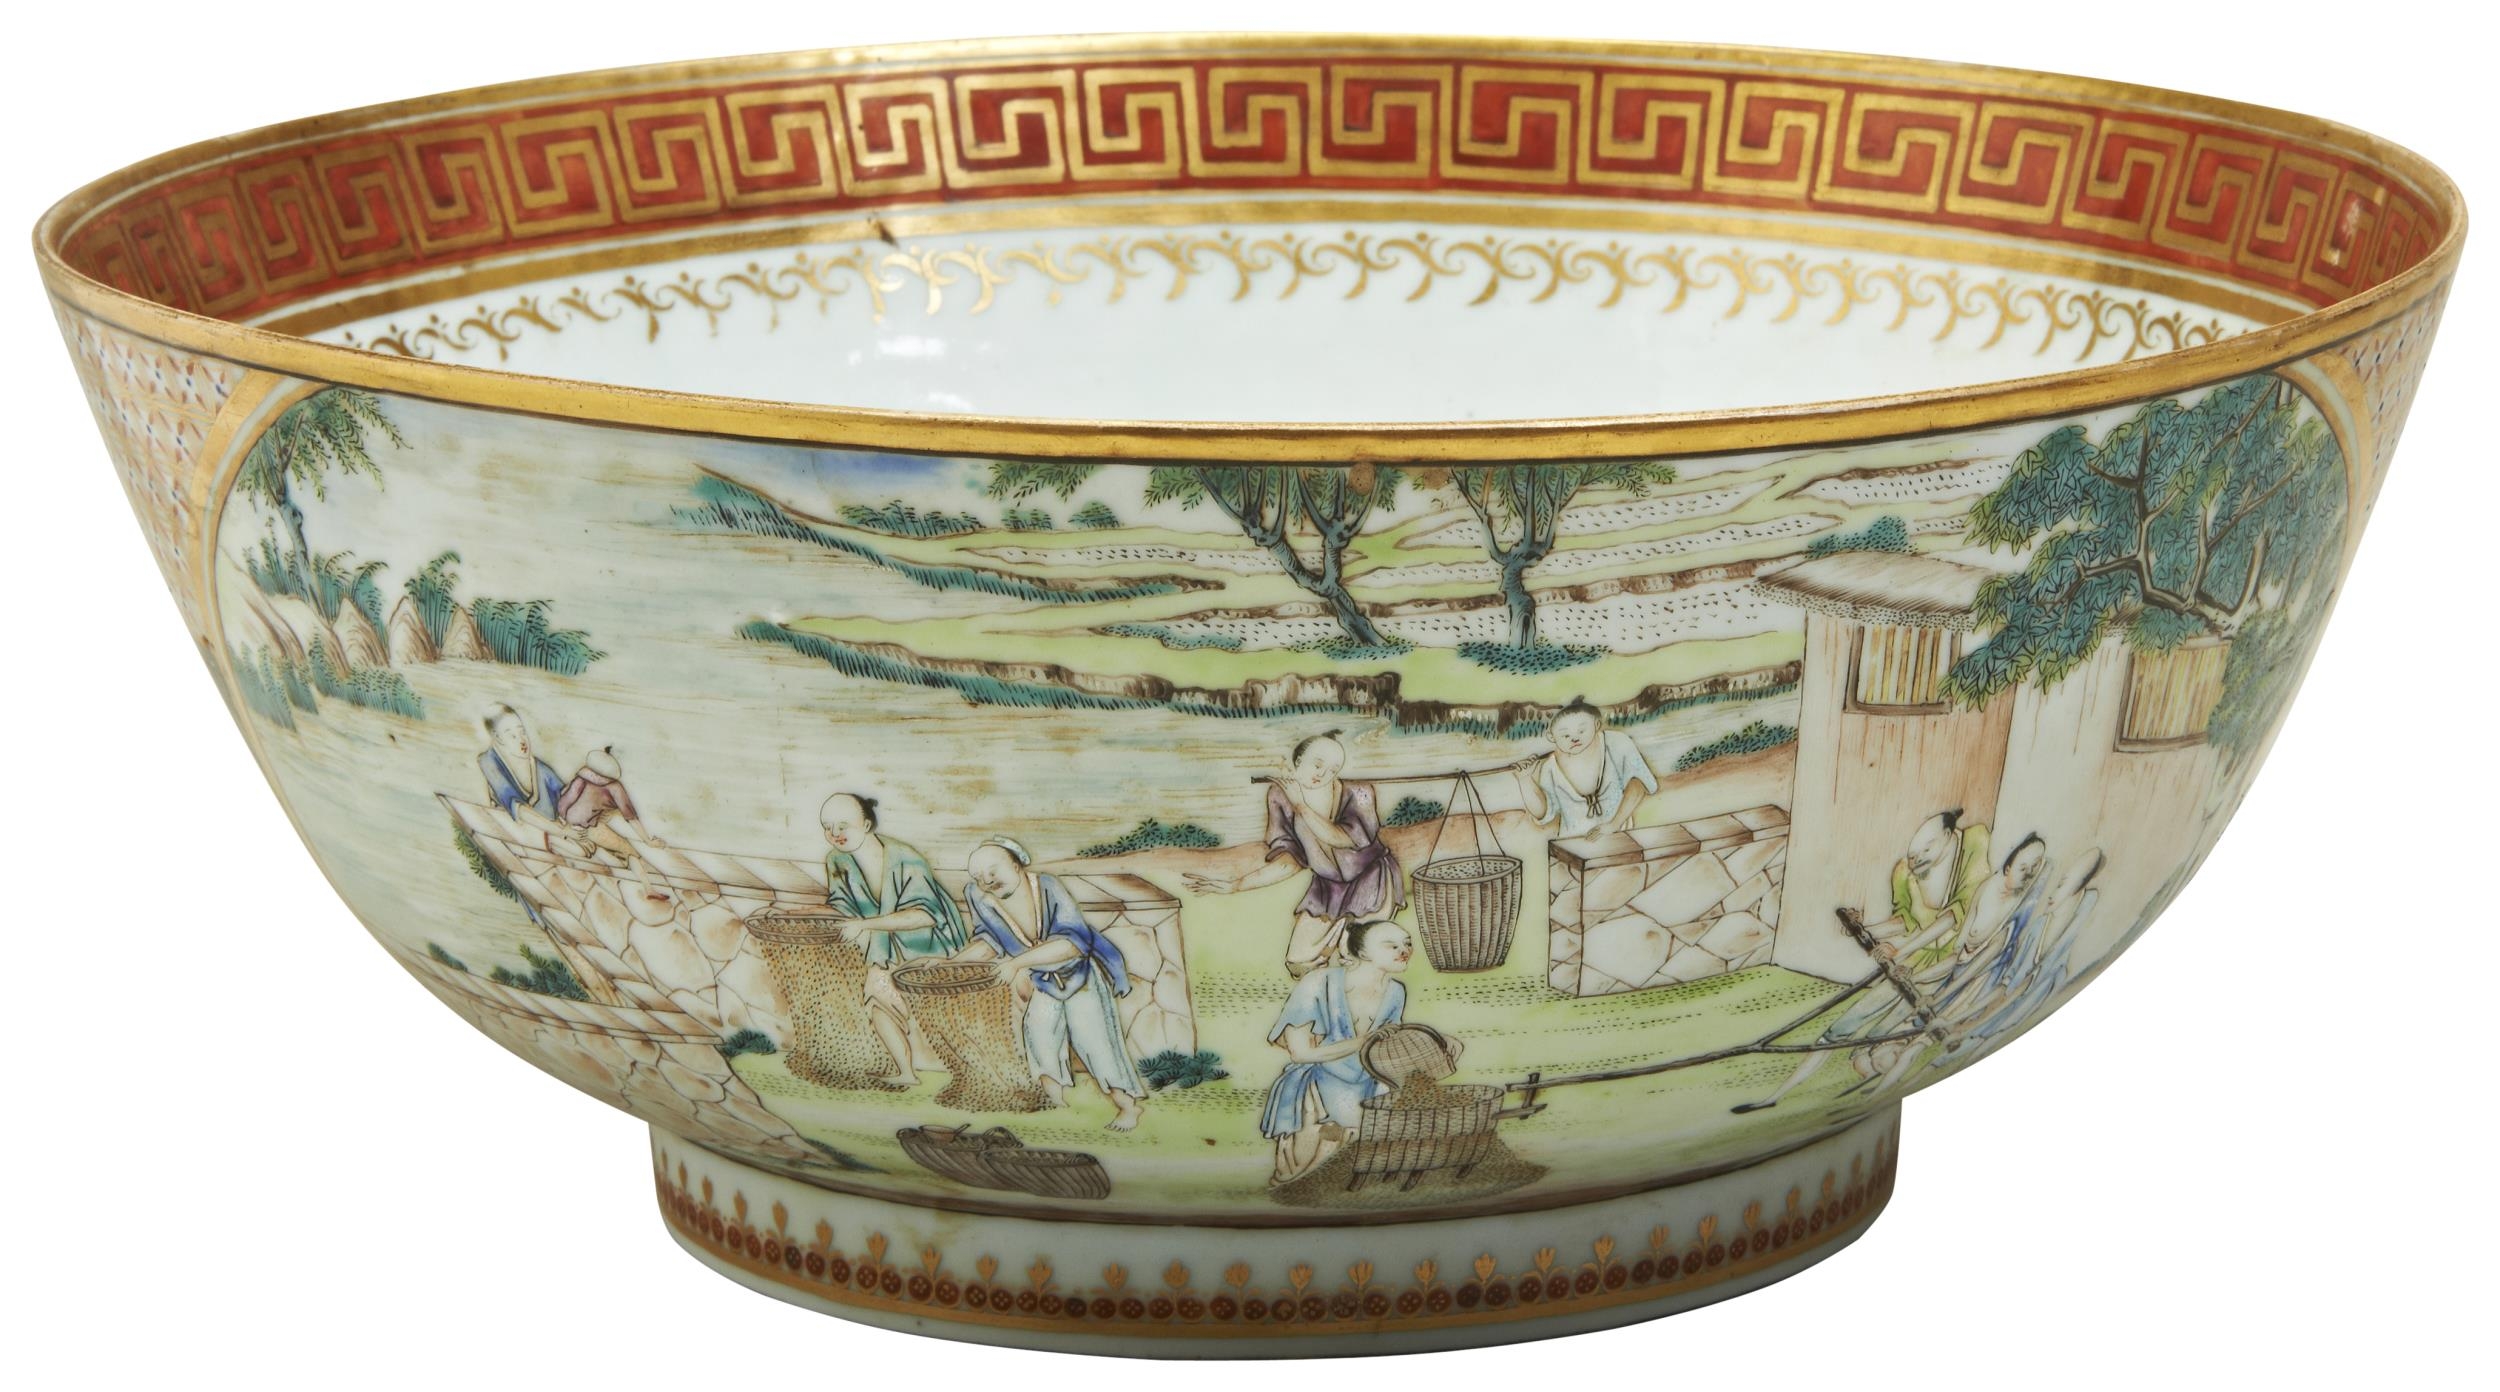 AN EXTREMELY RARE CHINESE EXPORT 'RICE PRODUCTION & SILK PRODUCTION' BOWL QIANLONG PERIOD (1736- - Image 2 of 3